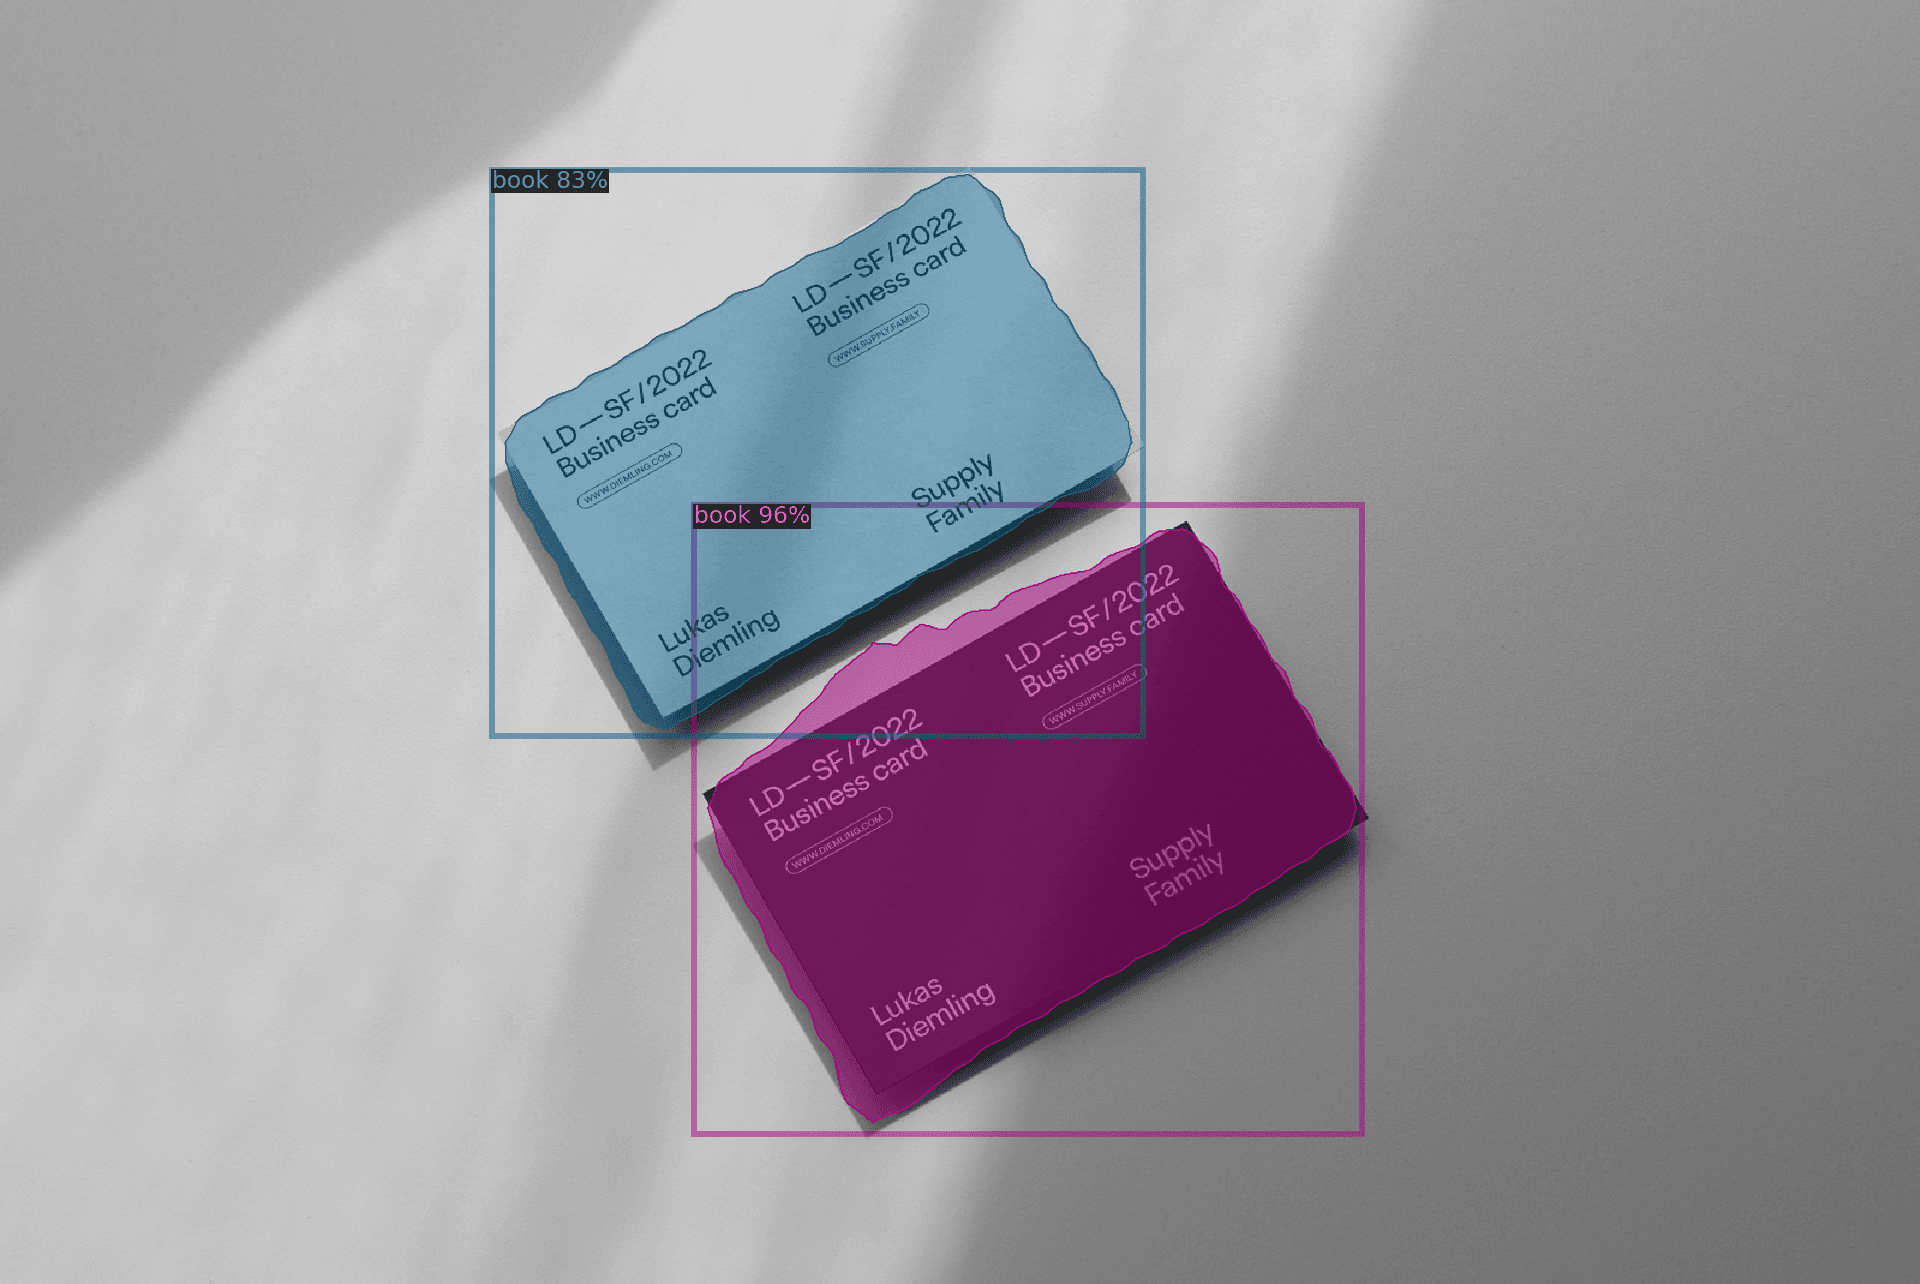 Business Cards without fine-tuning